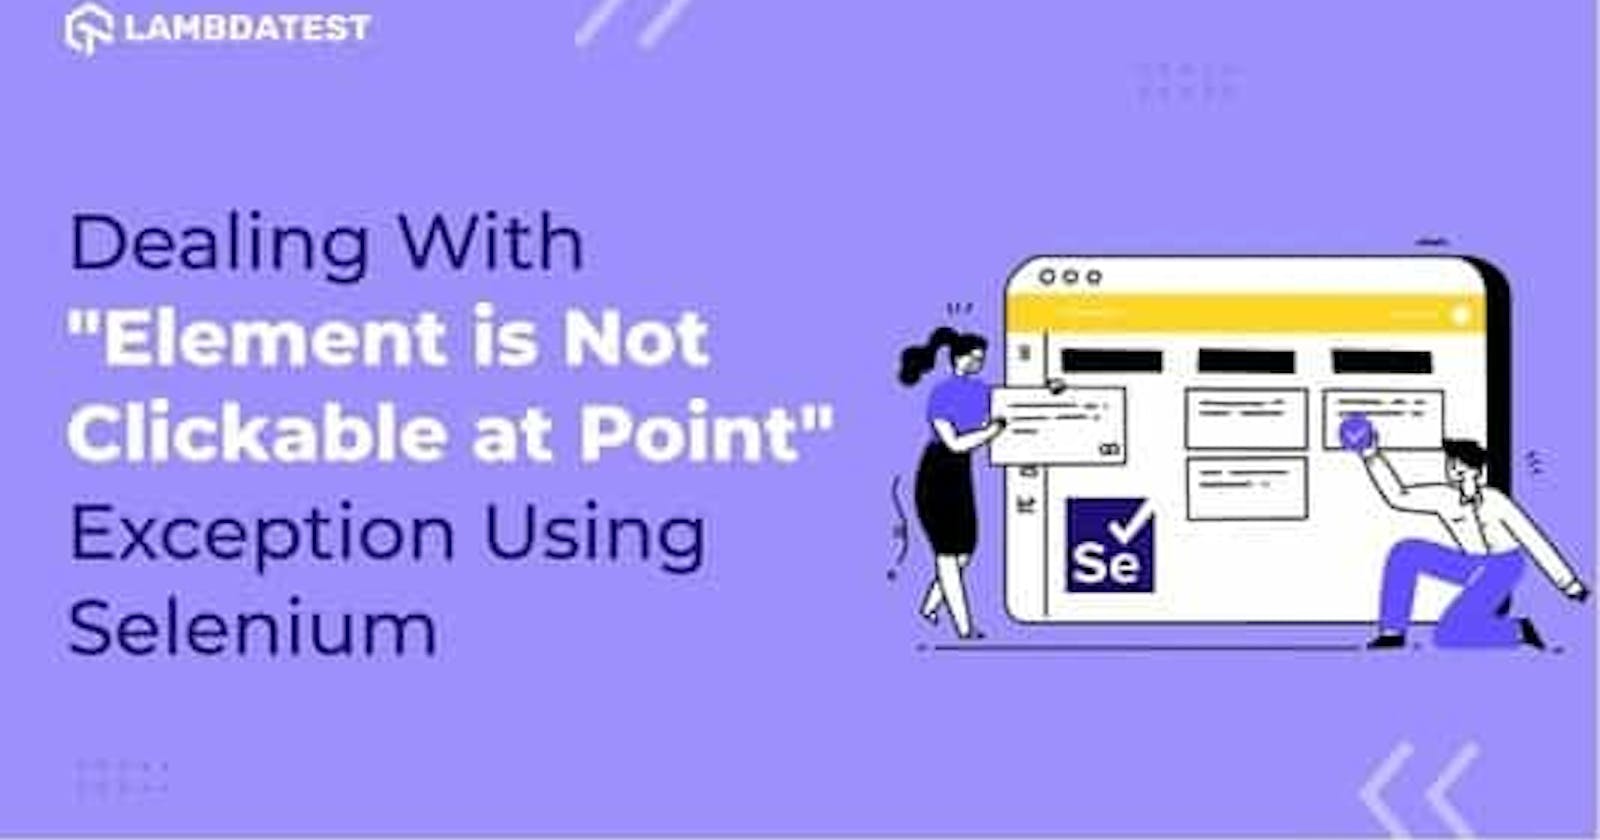 How To Deal With “Element is not clickable at point” Exception Using Selenium